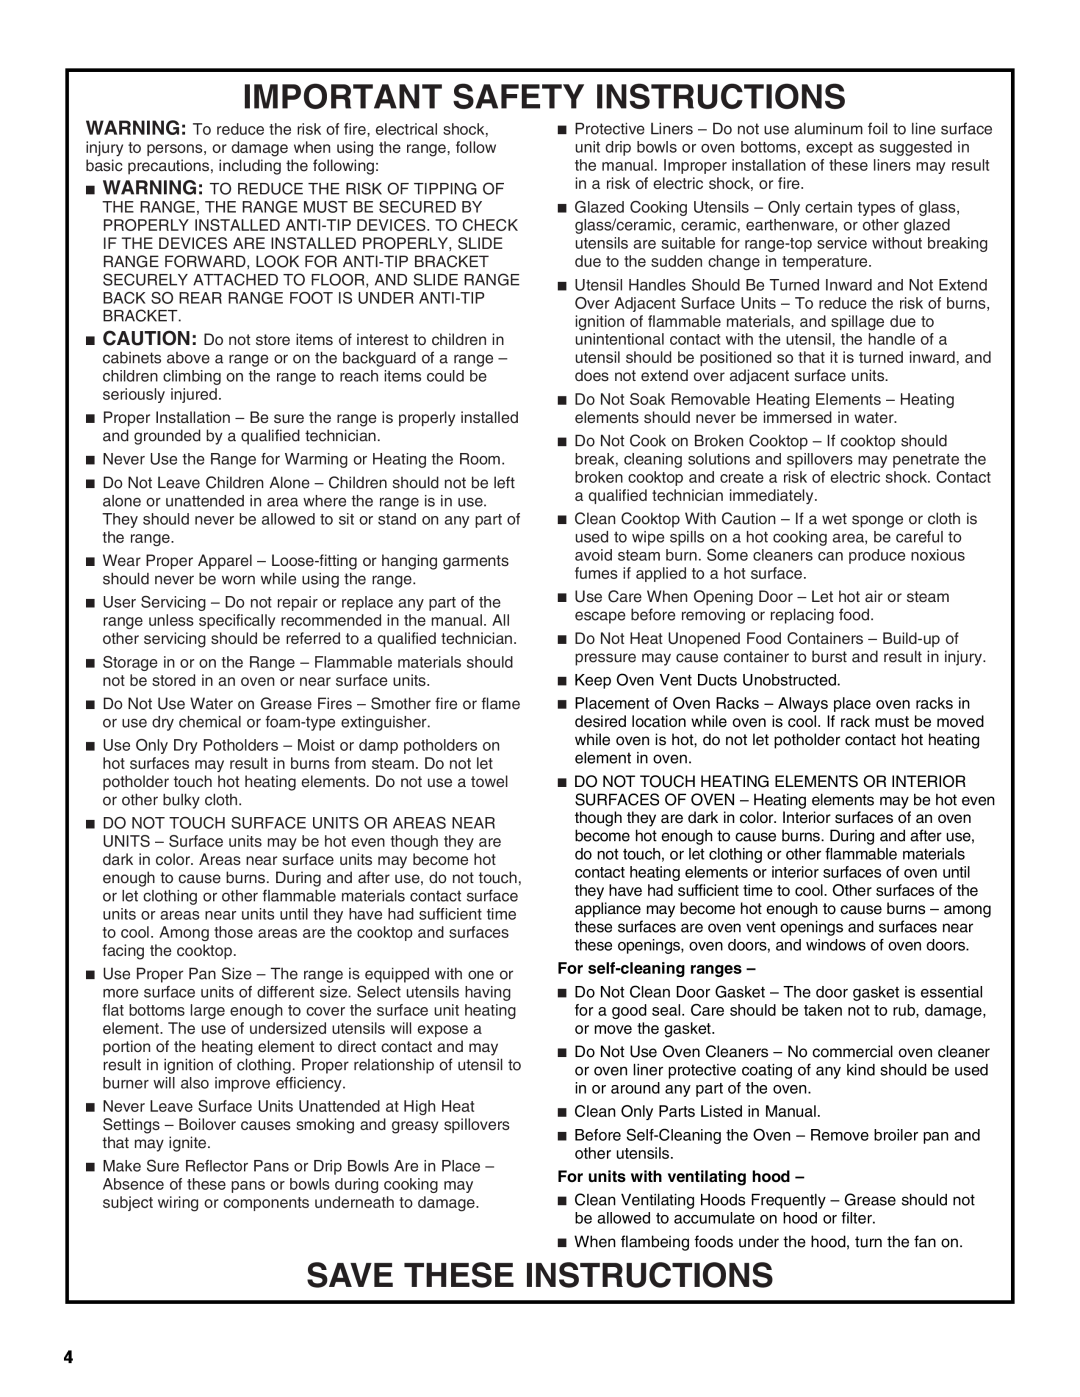 Whirlpool IES355RQ2 manual Important Safety Instructions, Save These Instructions, For self-cleaning ranges 